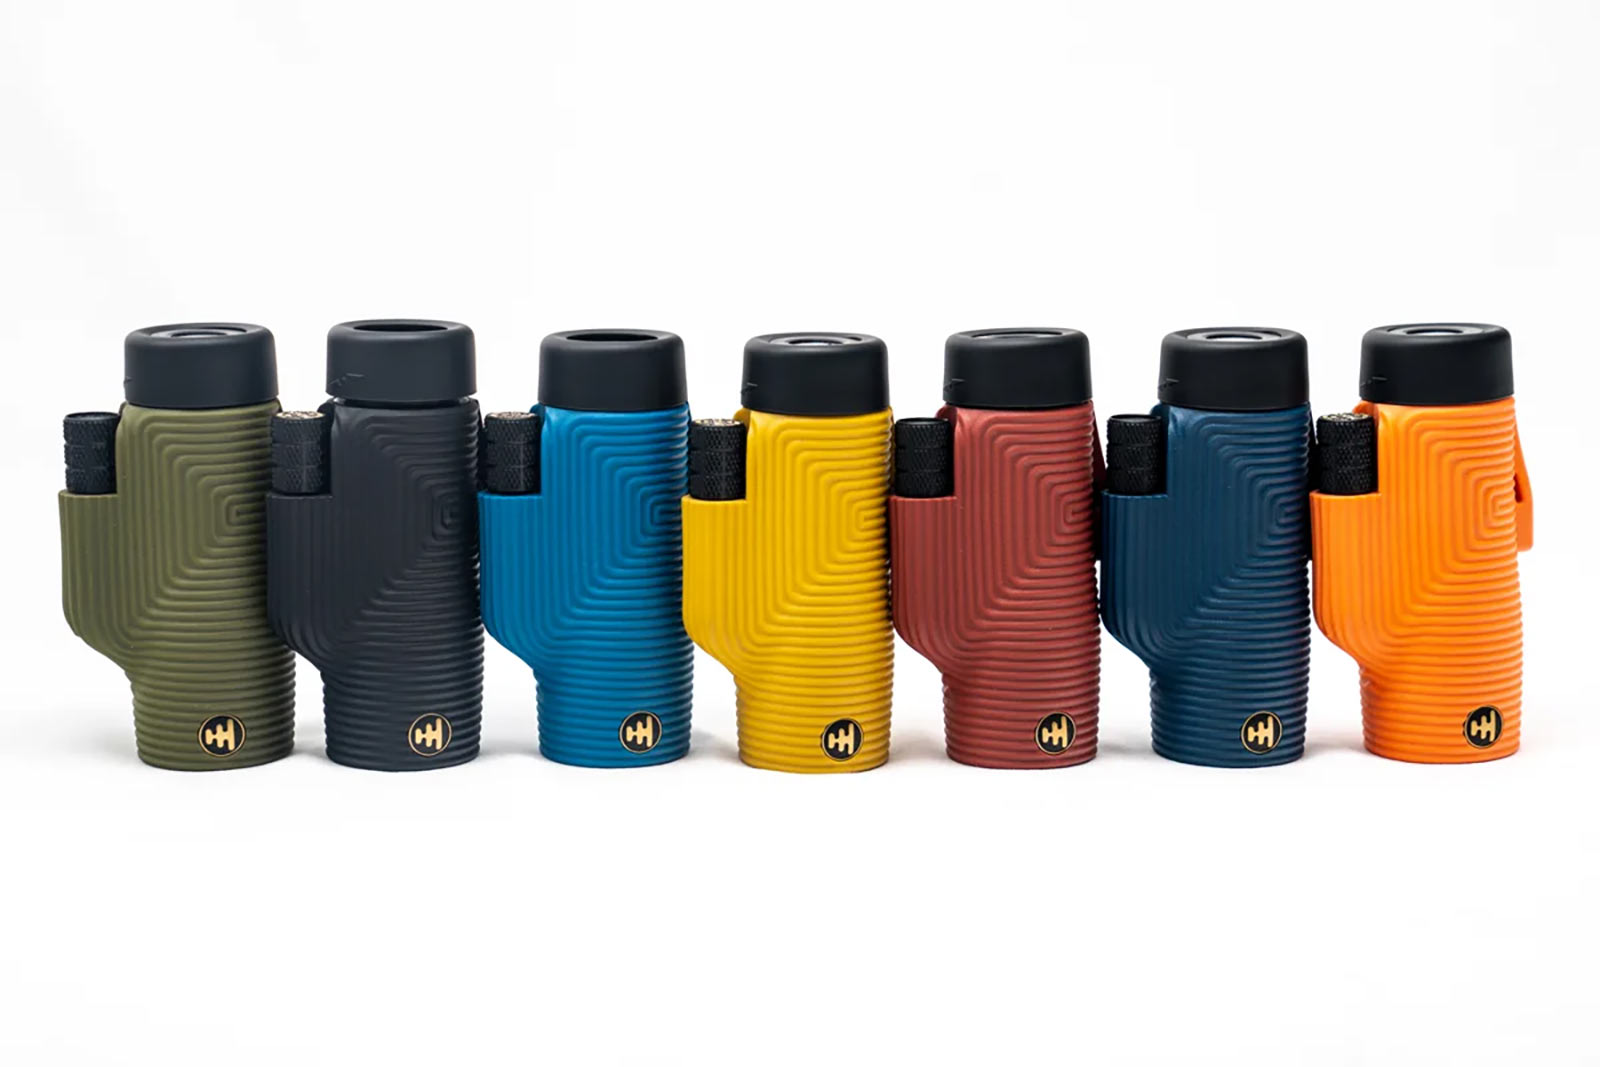 nocs zoom tube sports monocular comes in seven colors